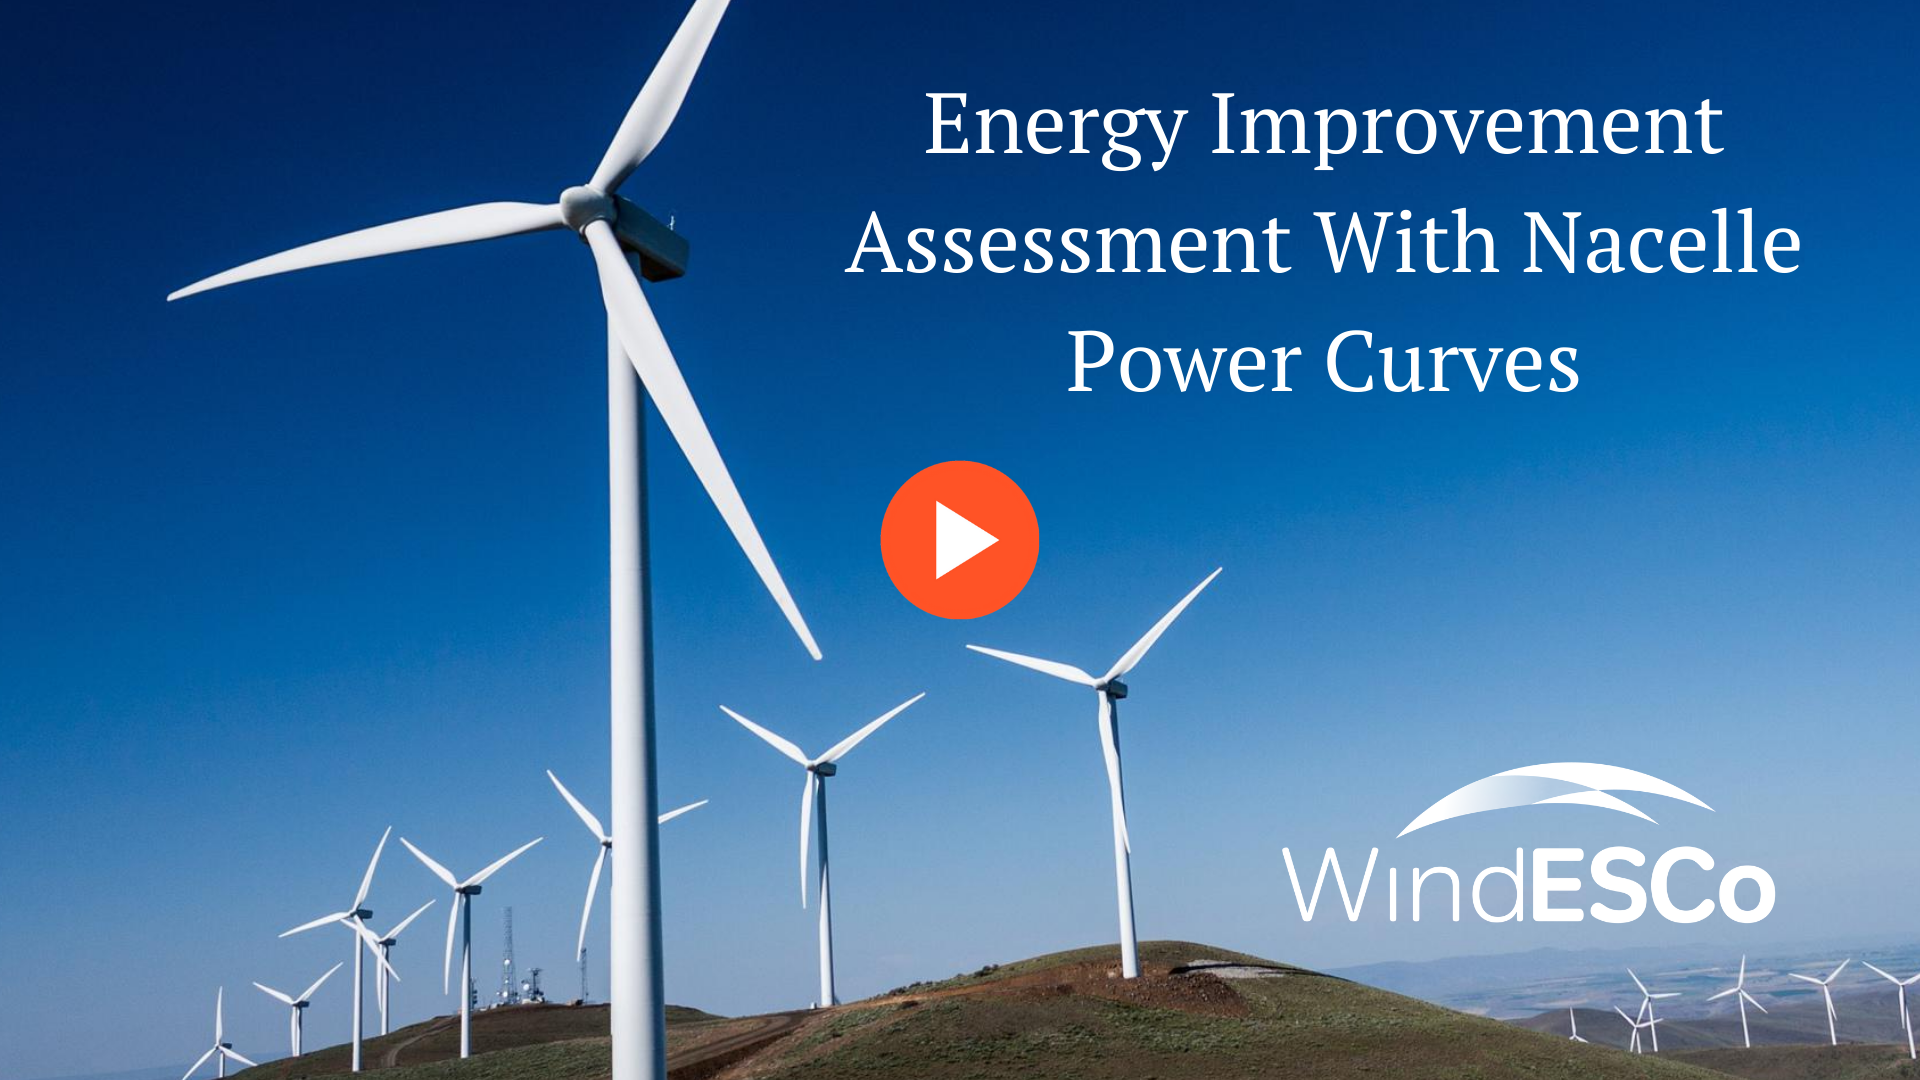 Why Nacelle Power Curves Can Be Misleading for Energy Improvement Assessments